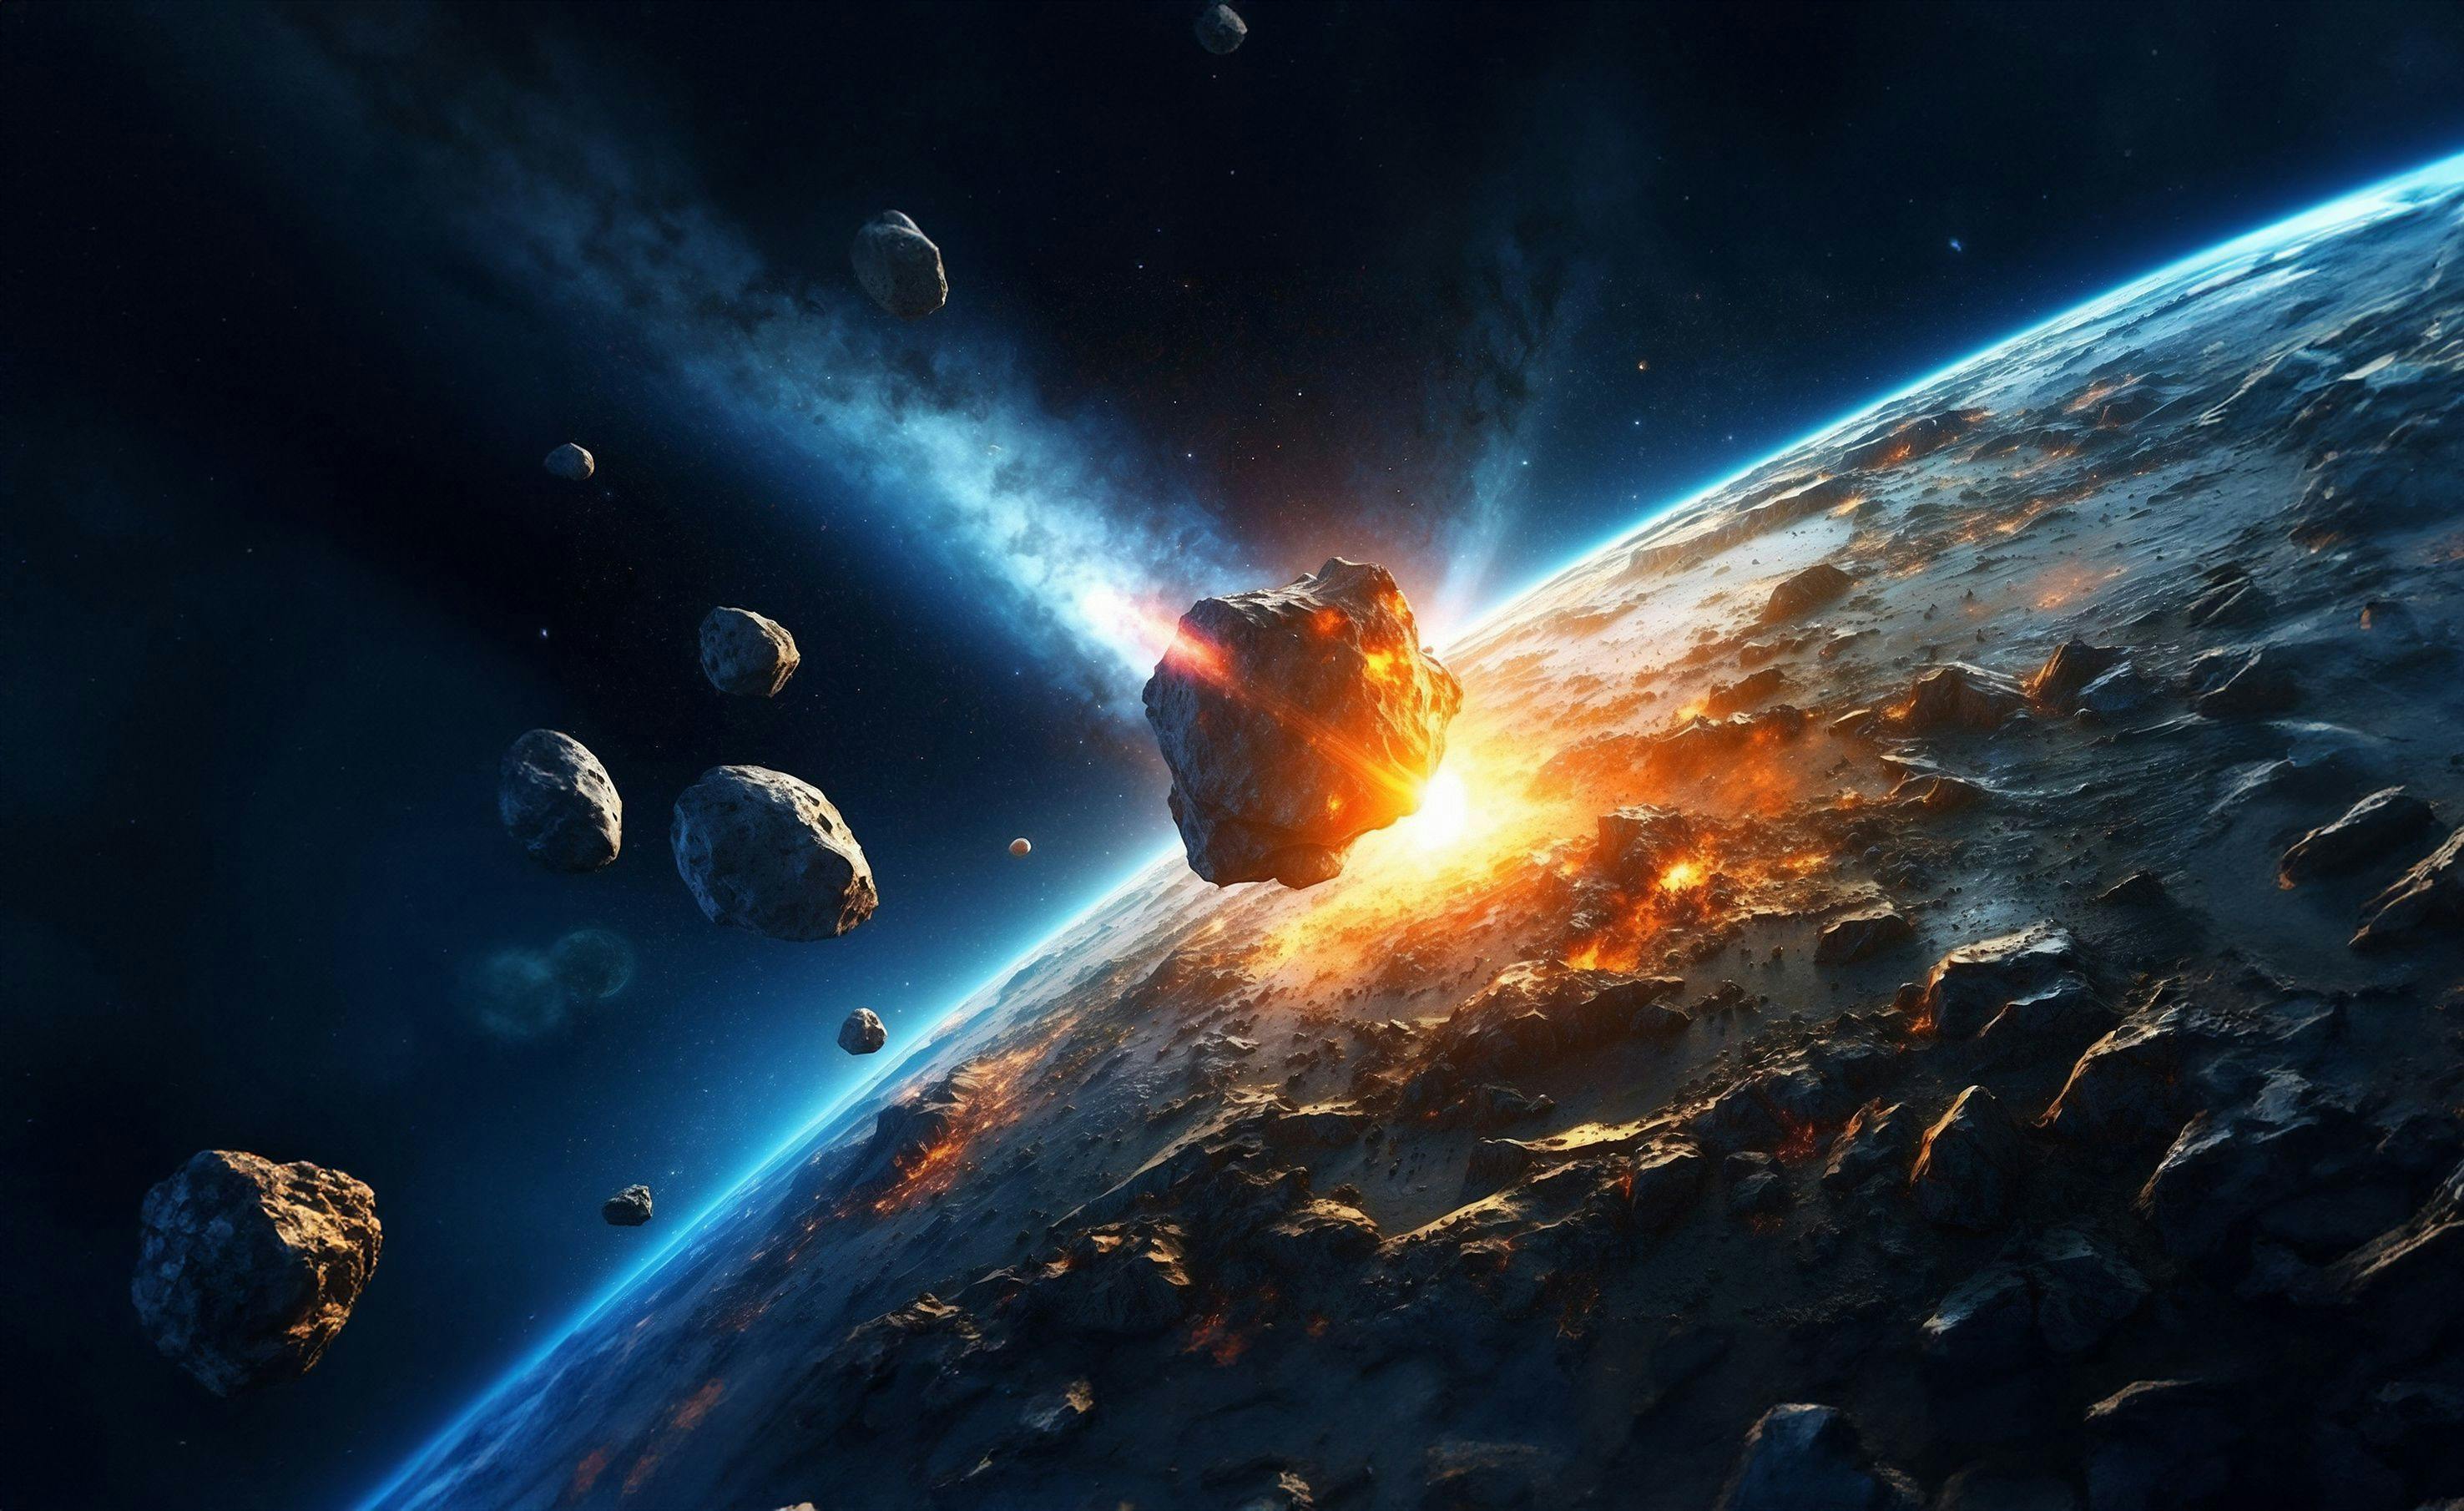 Near Earth object (NEO) on collision course with Earth © Visualmind - stock.adobe.com